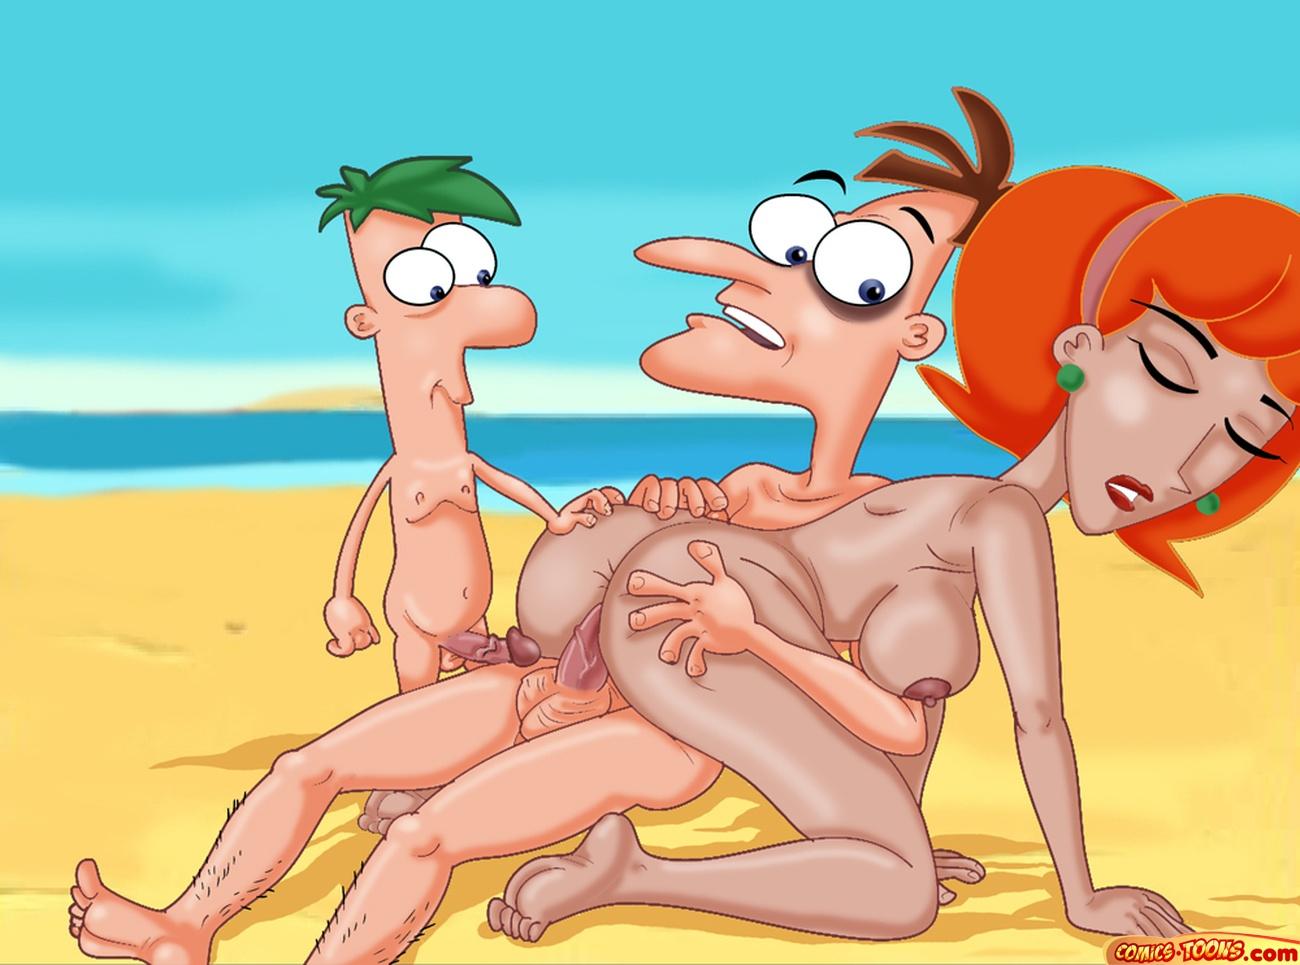 linda phineas and nude ferb Final fantasy xv cor leonis